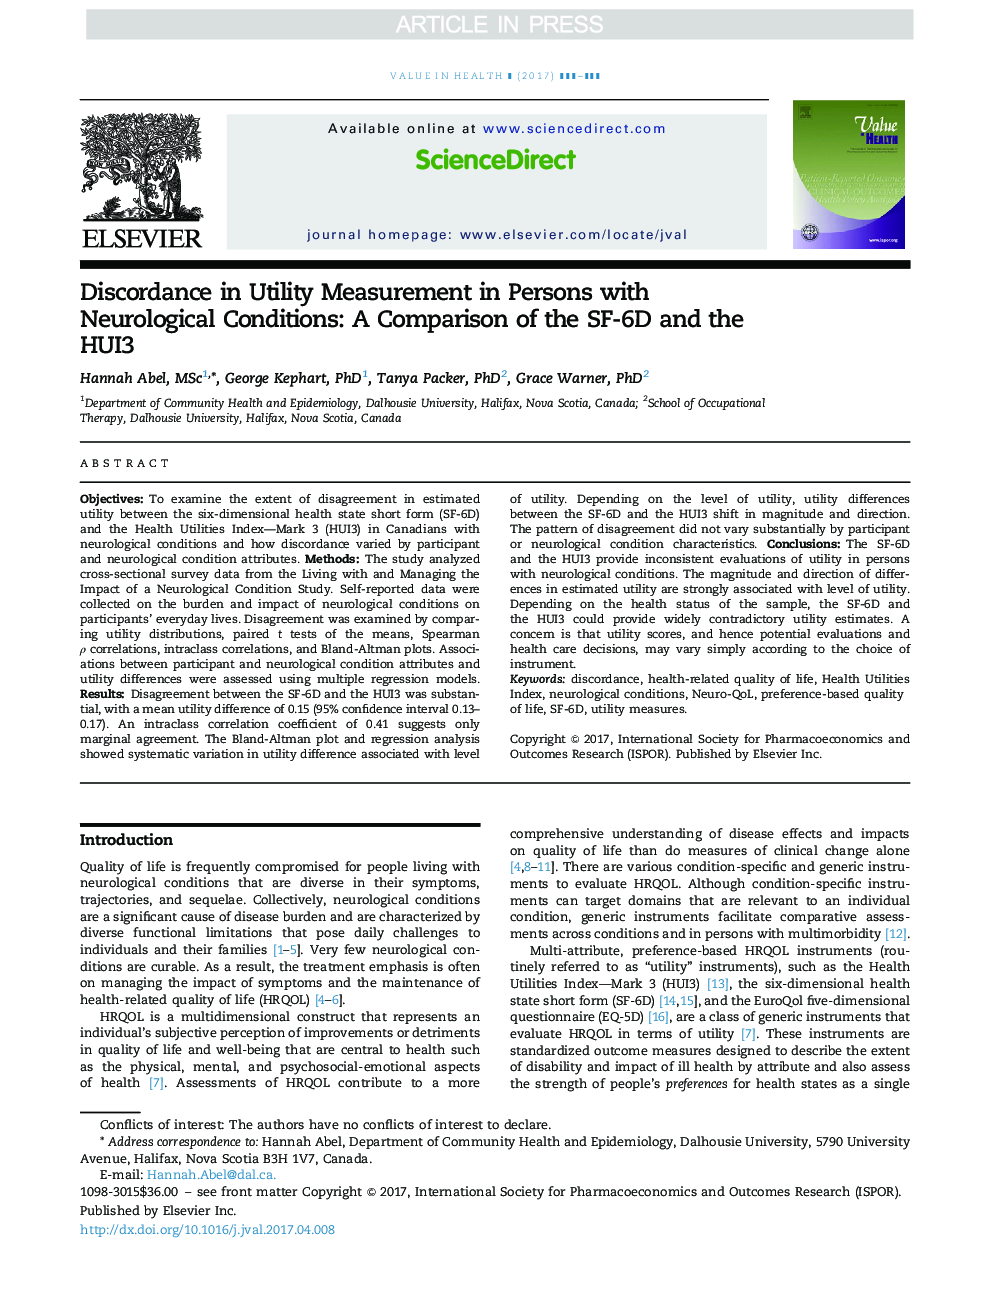 Discordance in Utility Measurement in Persons with Neurological Conditions: A Comparison of the SF-6D and the HUI3